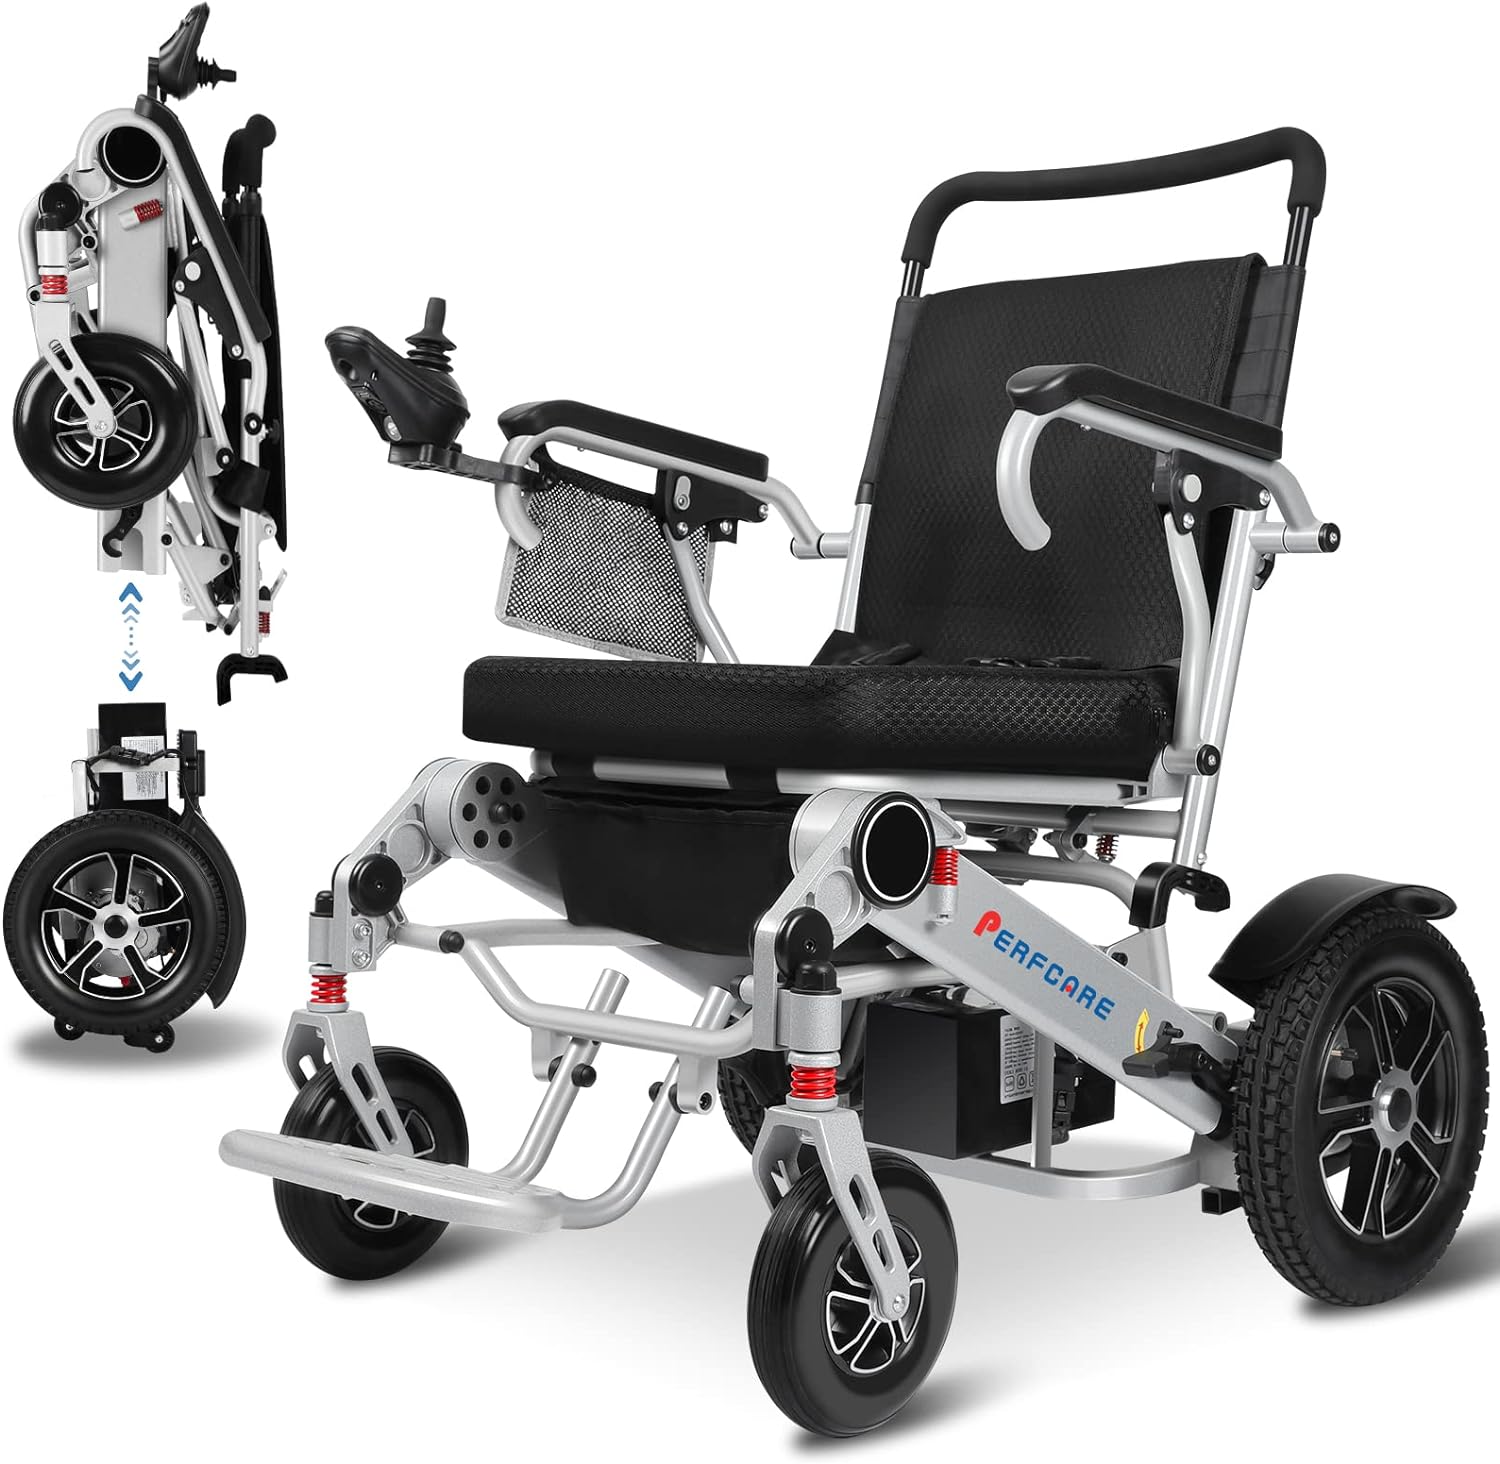 Perfcare Detachable Electric Wheelchair Review